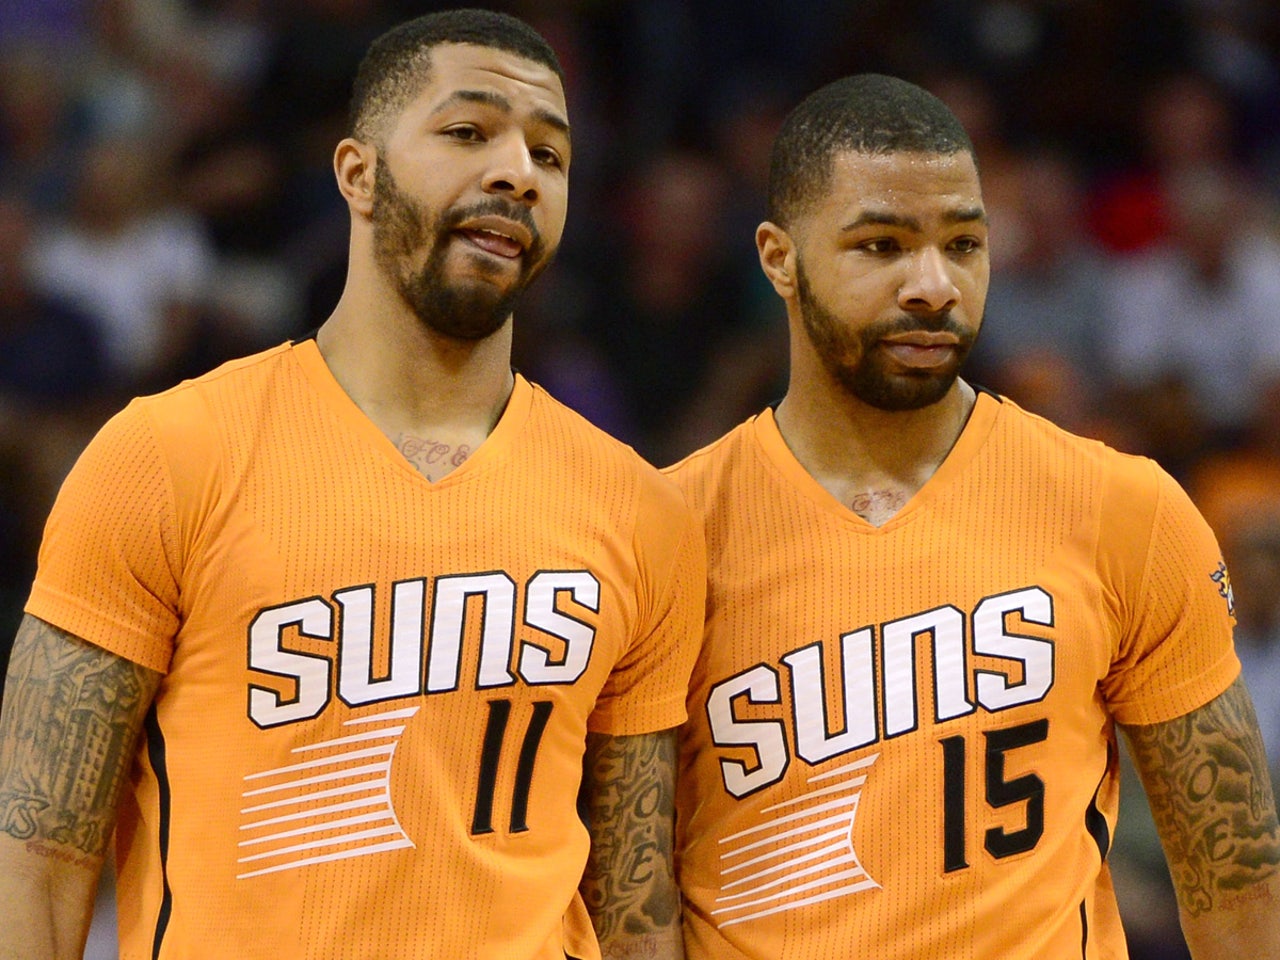 What's the fuss about NBA twin stars Markieff and Marcus Morris